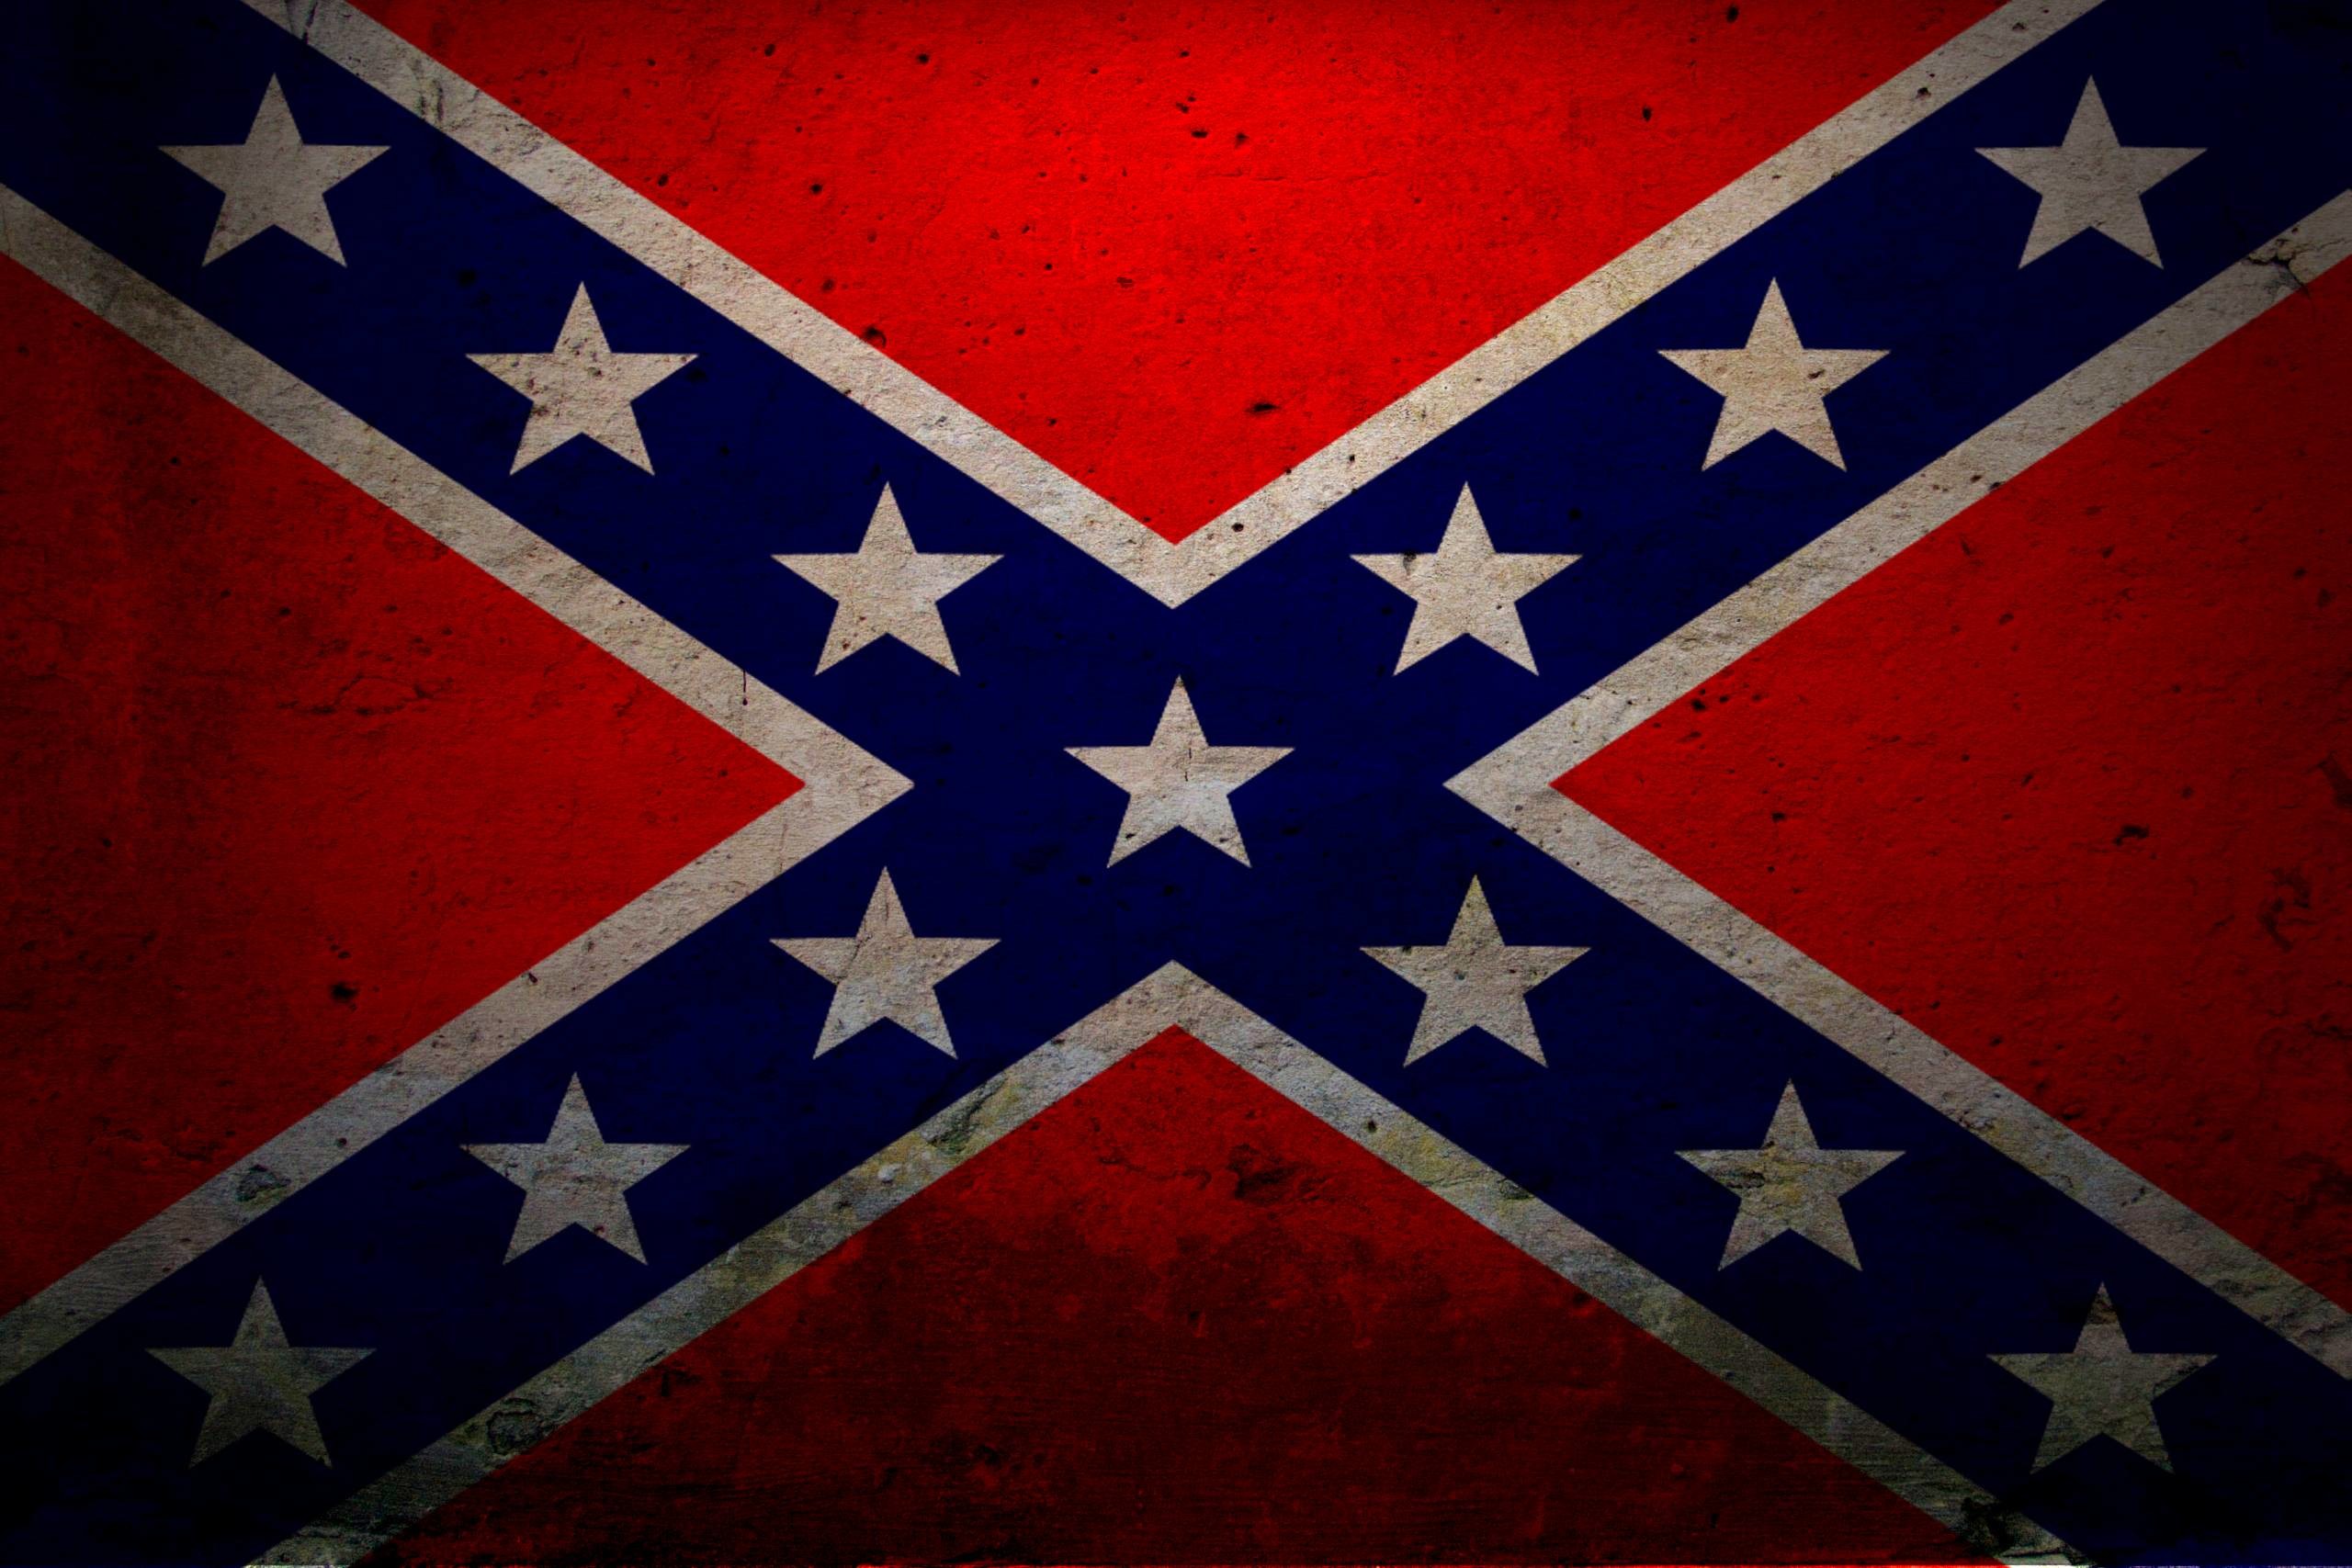 3 Flags Of The Confederate States Of America Wallpapers - Battle Of Bull Run Flag - HD Wallpaper 